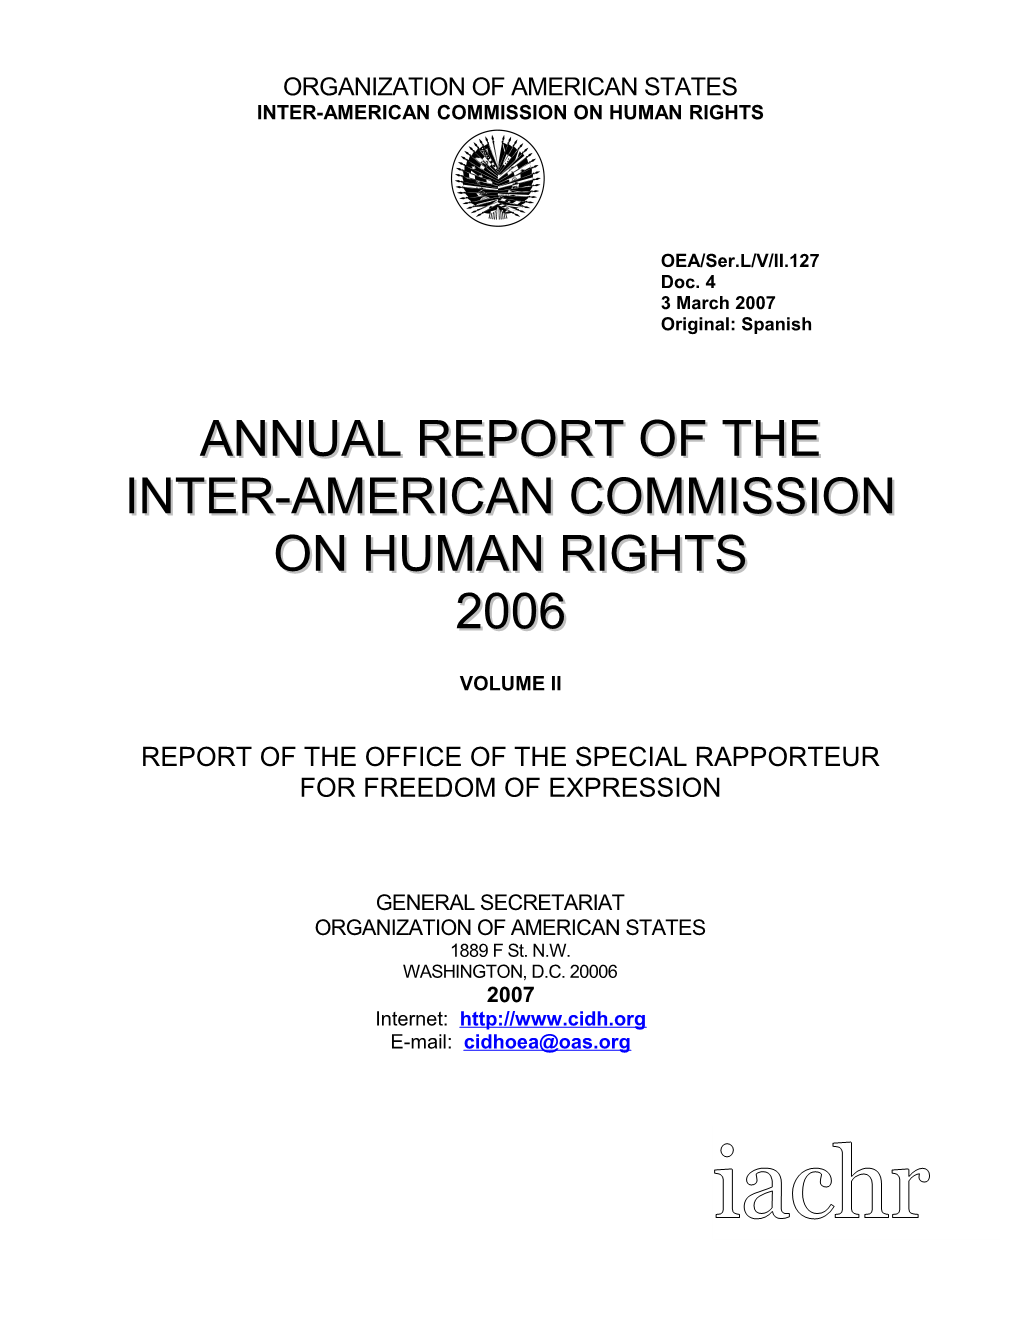 Inter-American Commission on Human Rights s1